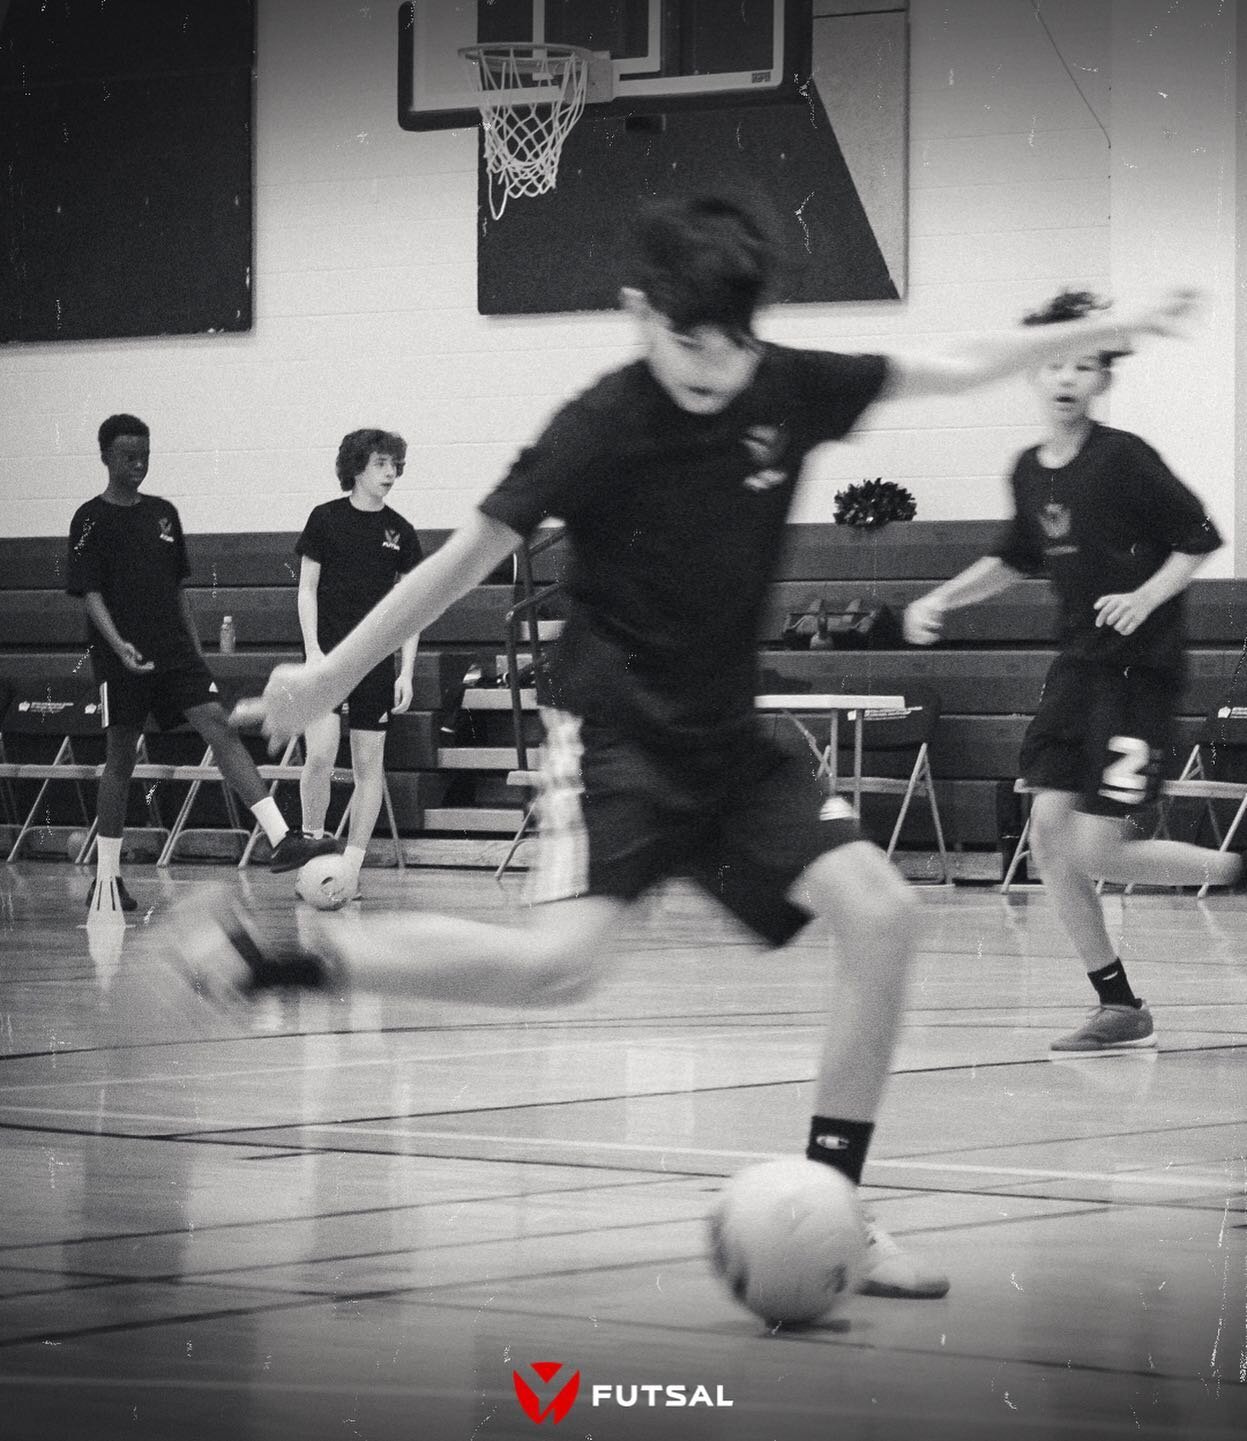 ⚡️⚽️ Flexibility meets Quality Training with Y Futsal Program! 

We understand that busy schedules can sometimes make it difficult to commit to regular training sessions. That's why we offer a futsal program that provides the flexibility you need wit